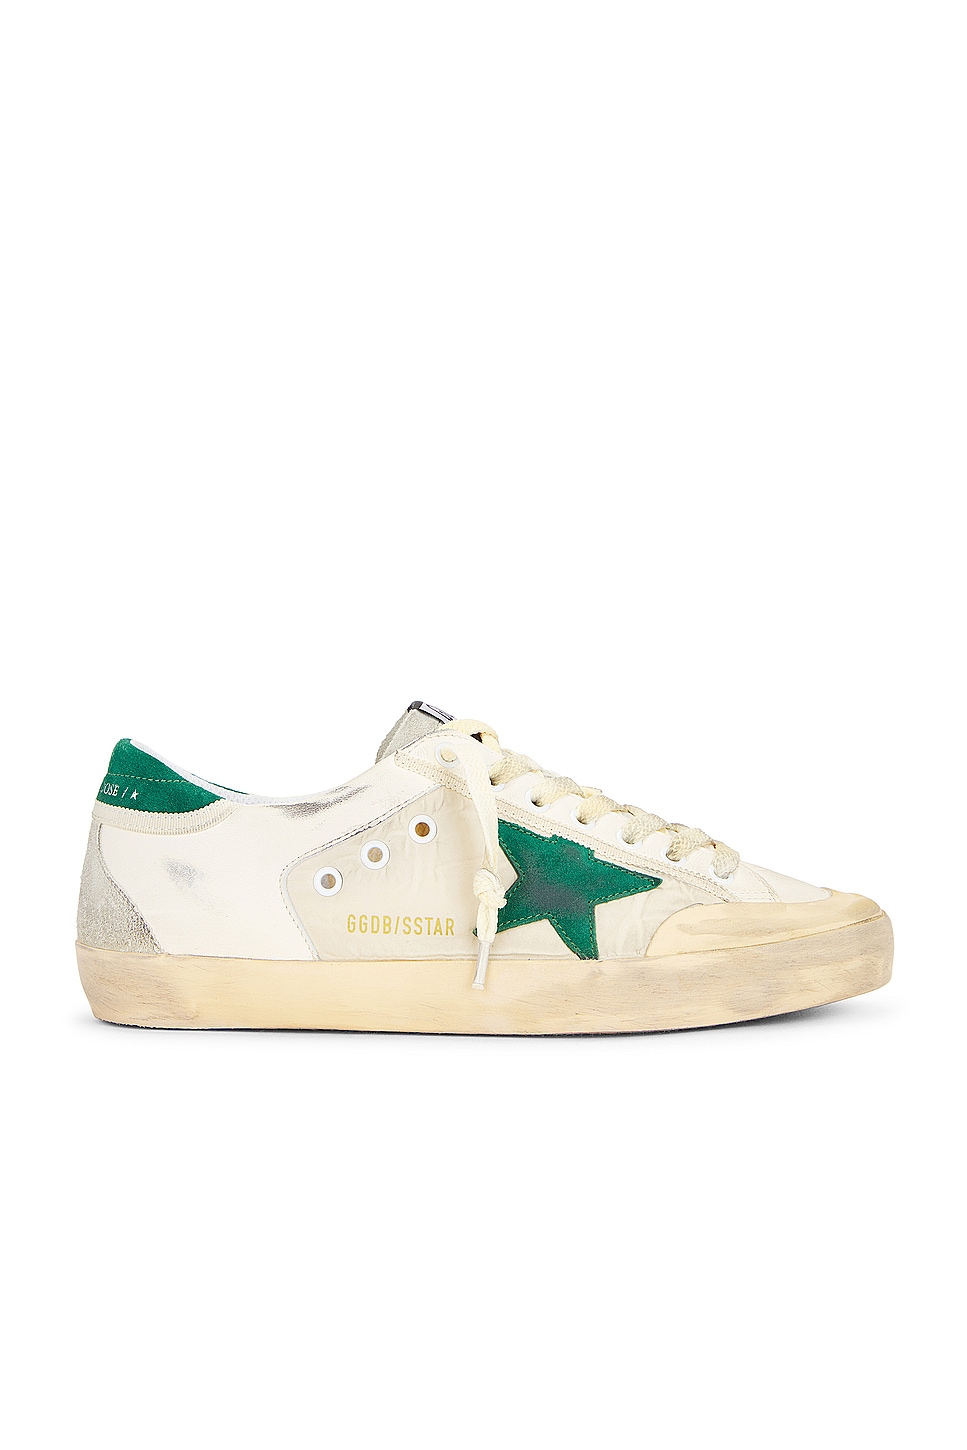 Image 1 of Golden Goose Super Star Nylon And Nappa Leather Star in White, Green, & Ice